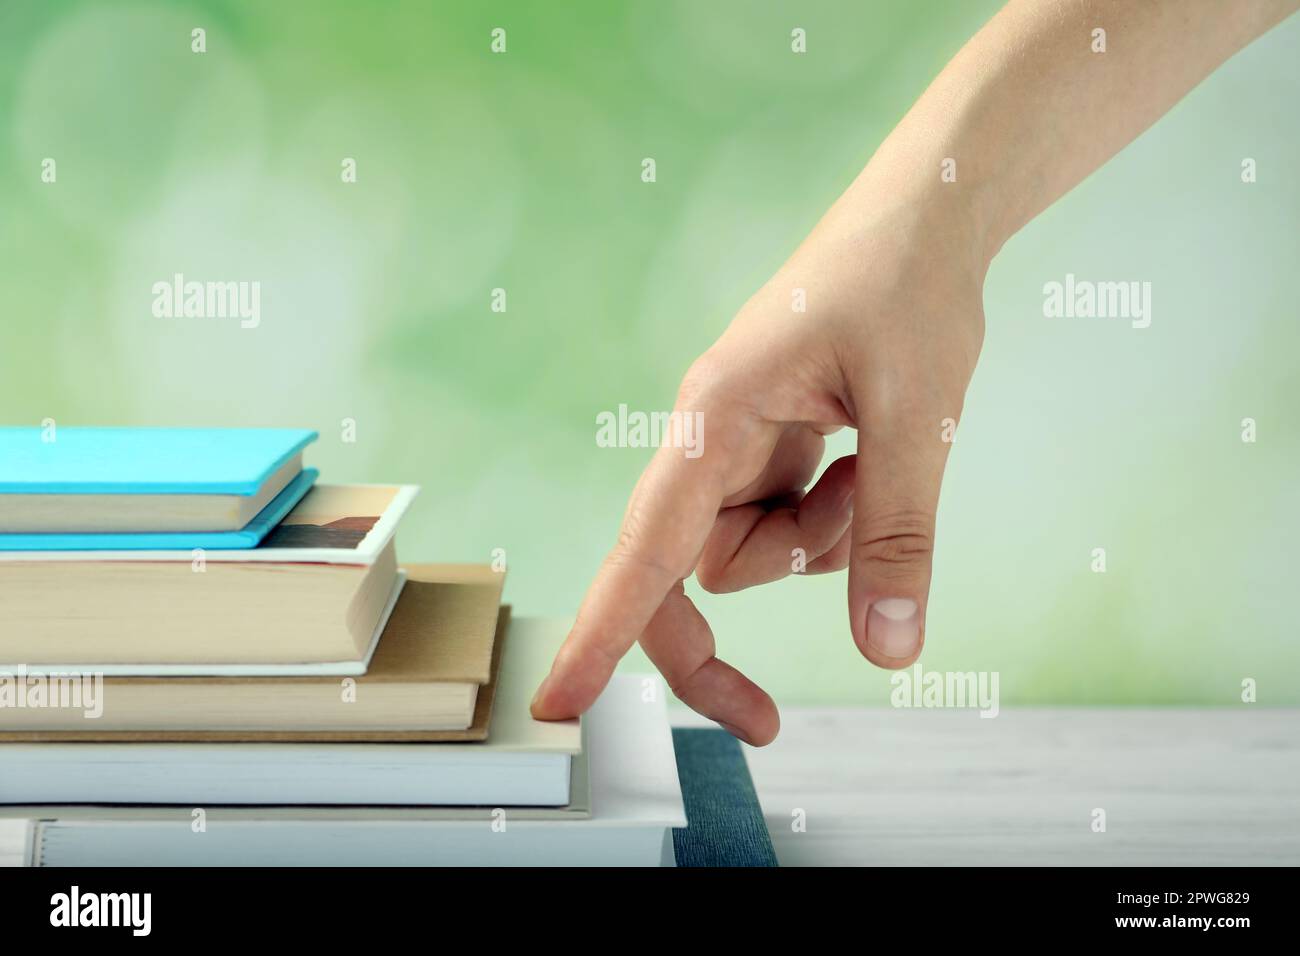 Woman climbing up stairs of books with fingers on white wooden table against blurred background, closeup Stock Photo